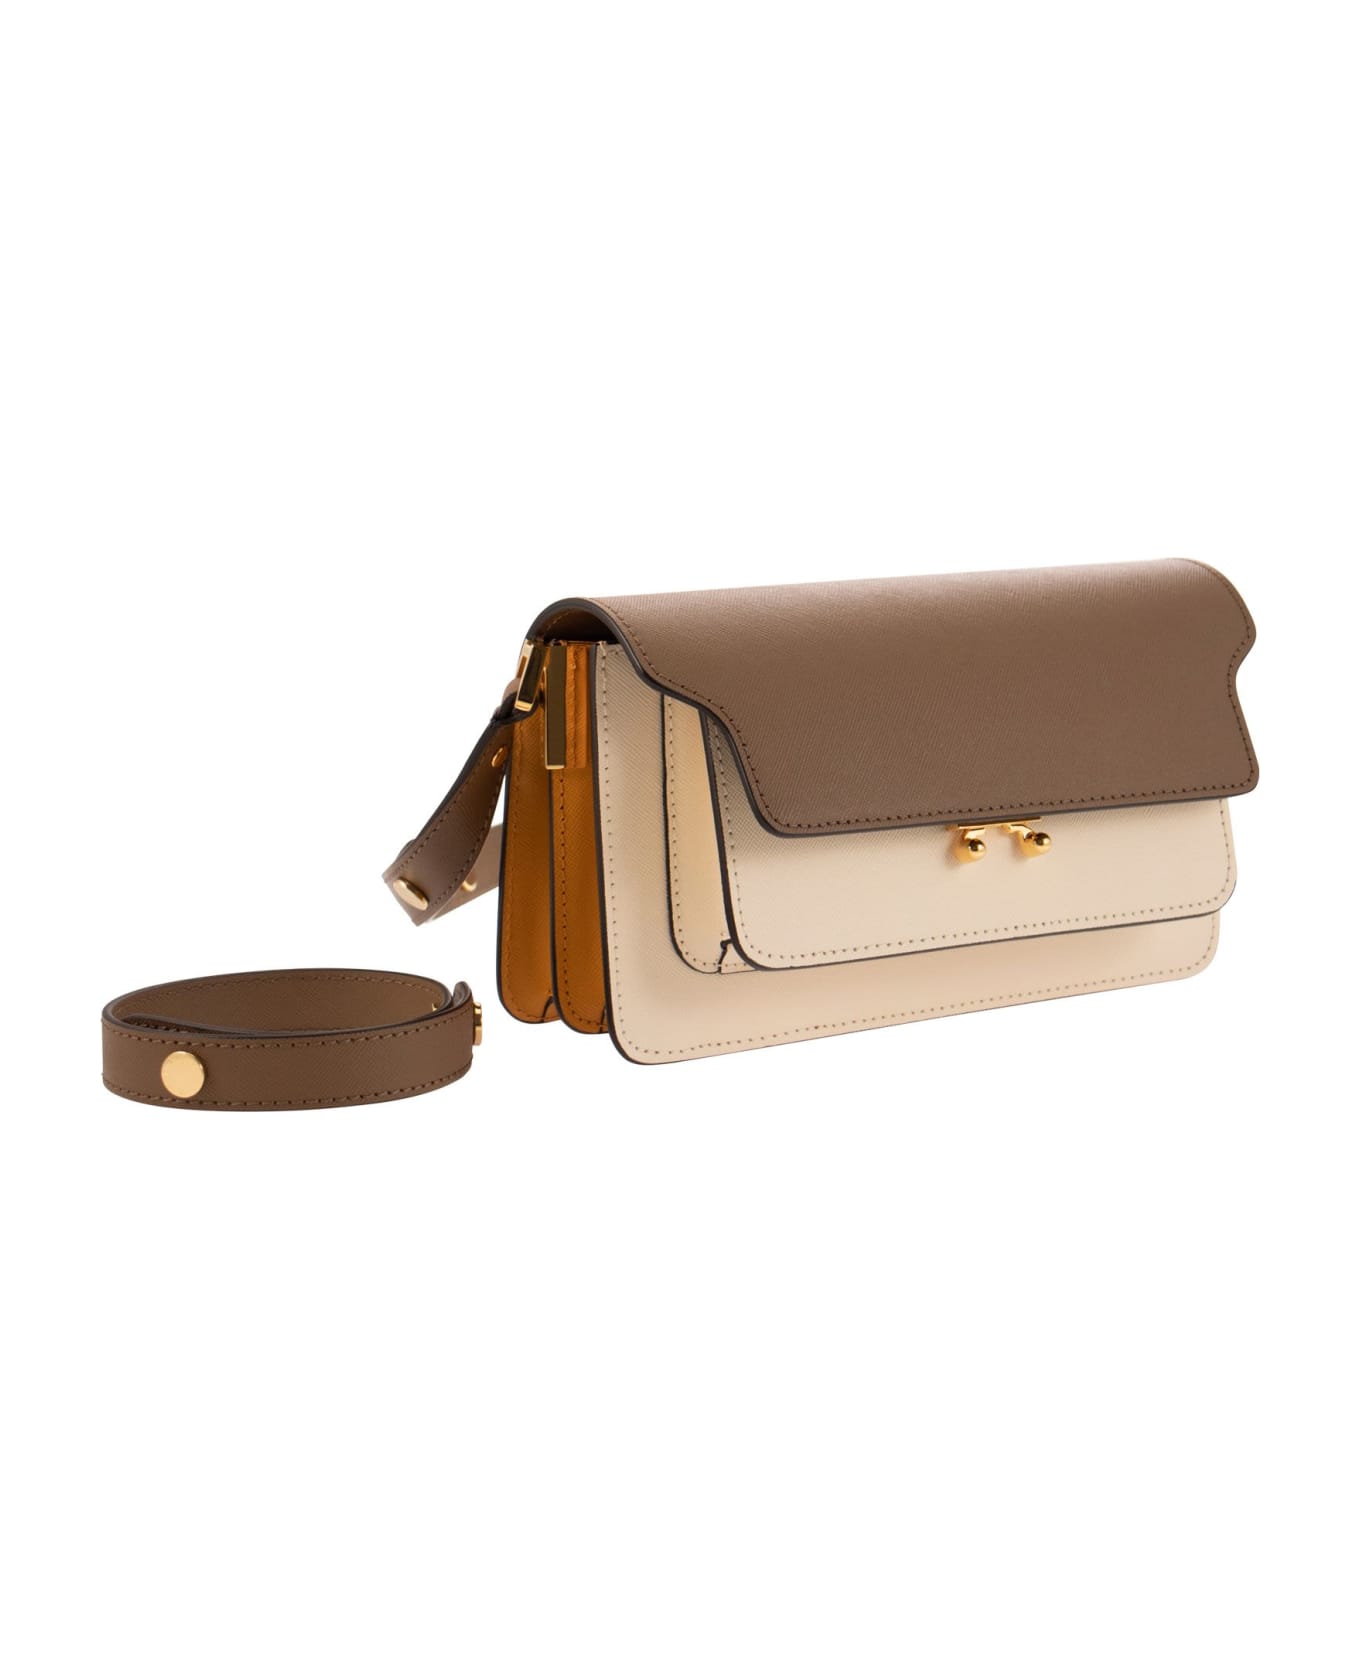 Marni White And Brown East/west Trunk Bag In Saffiano Leather - Brown